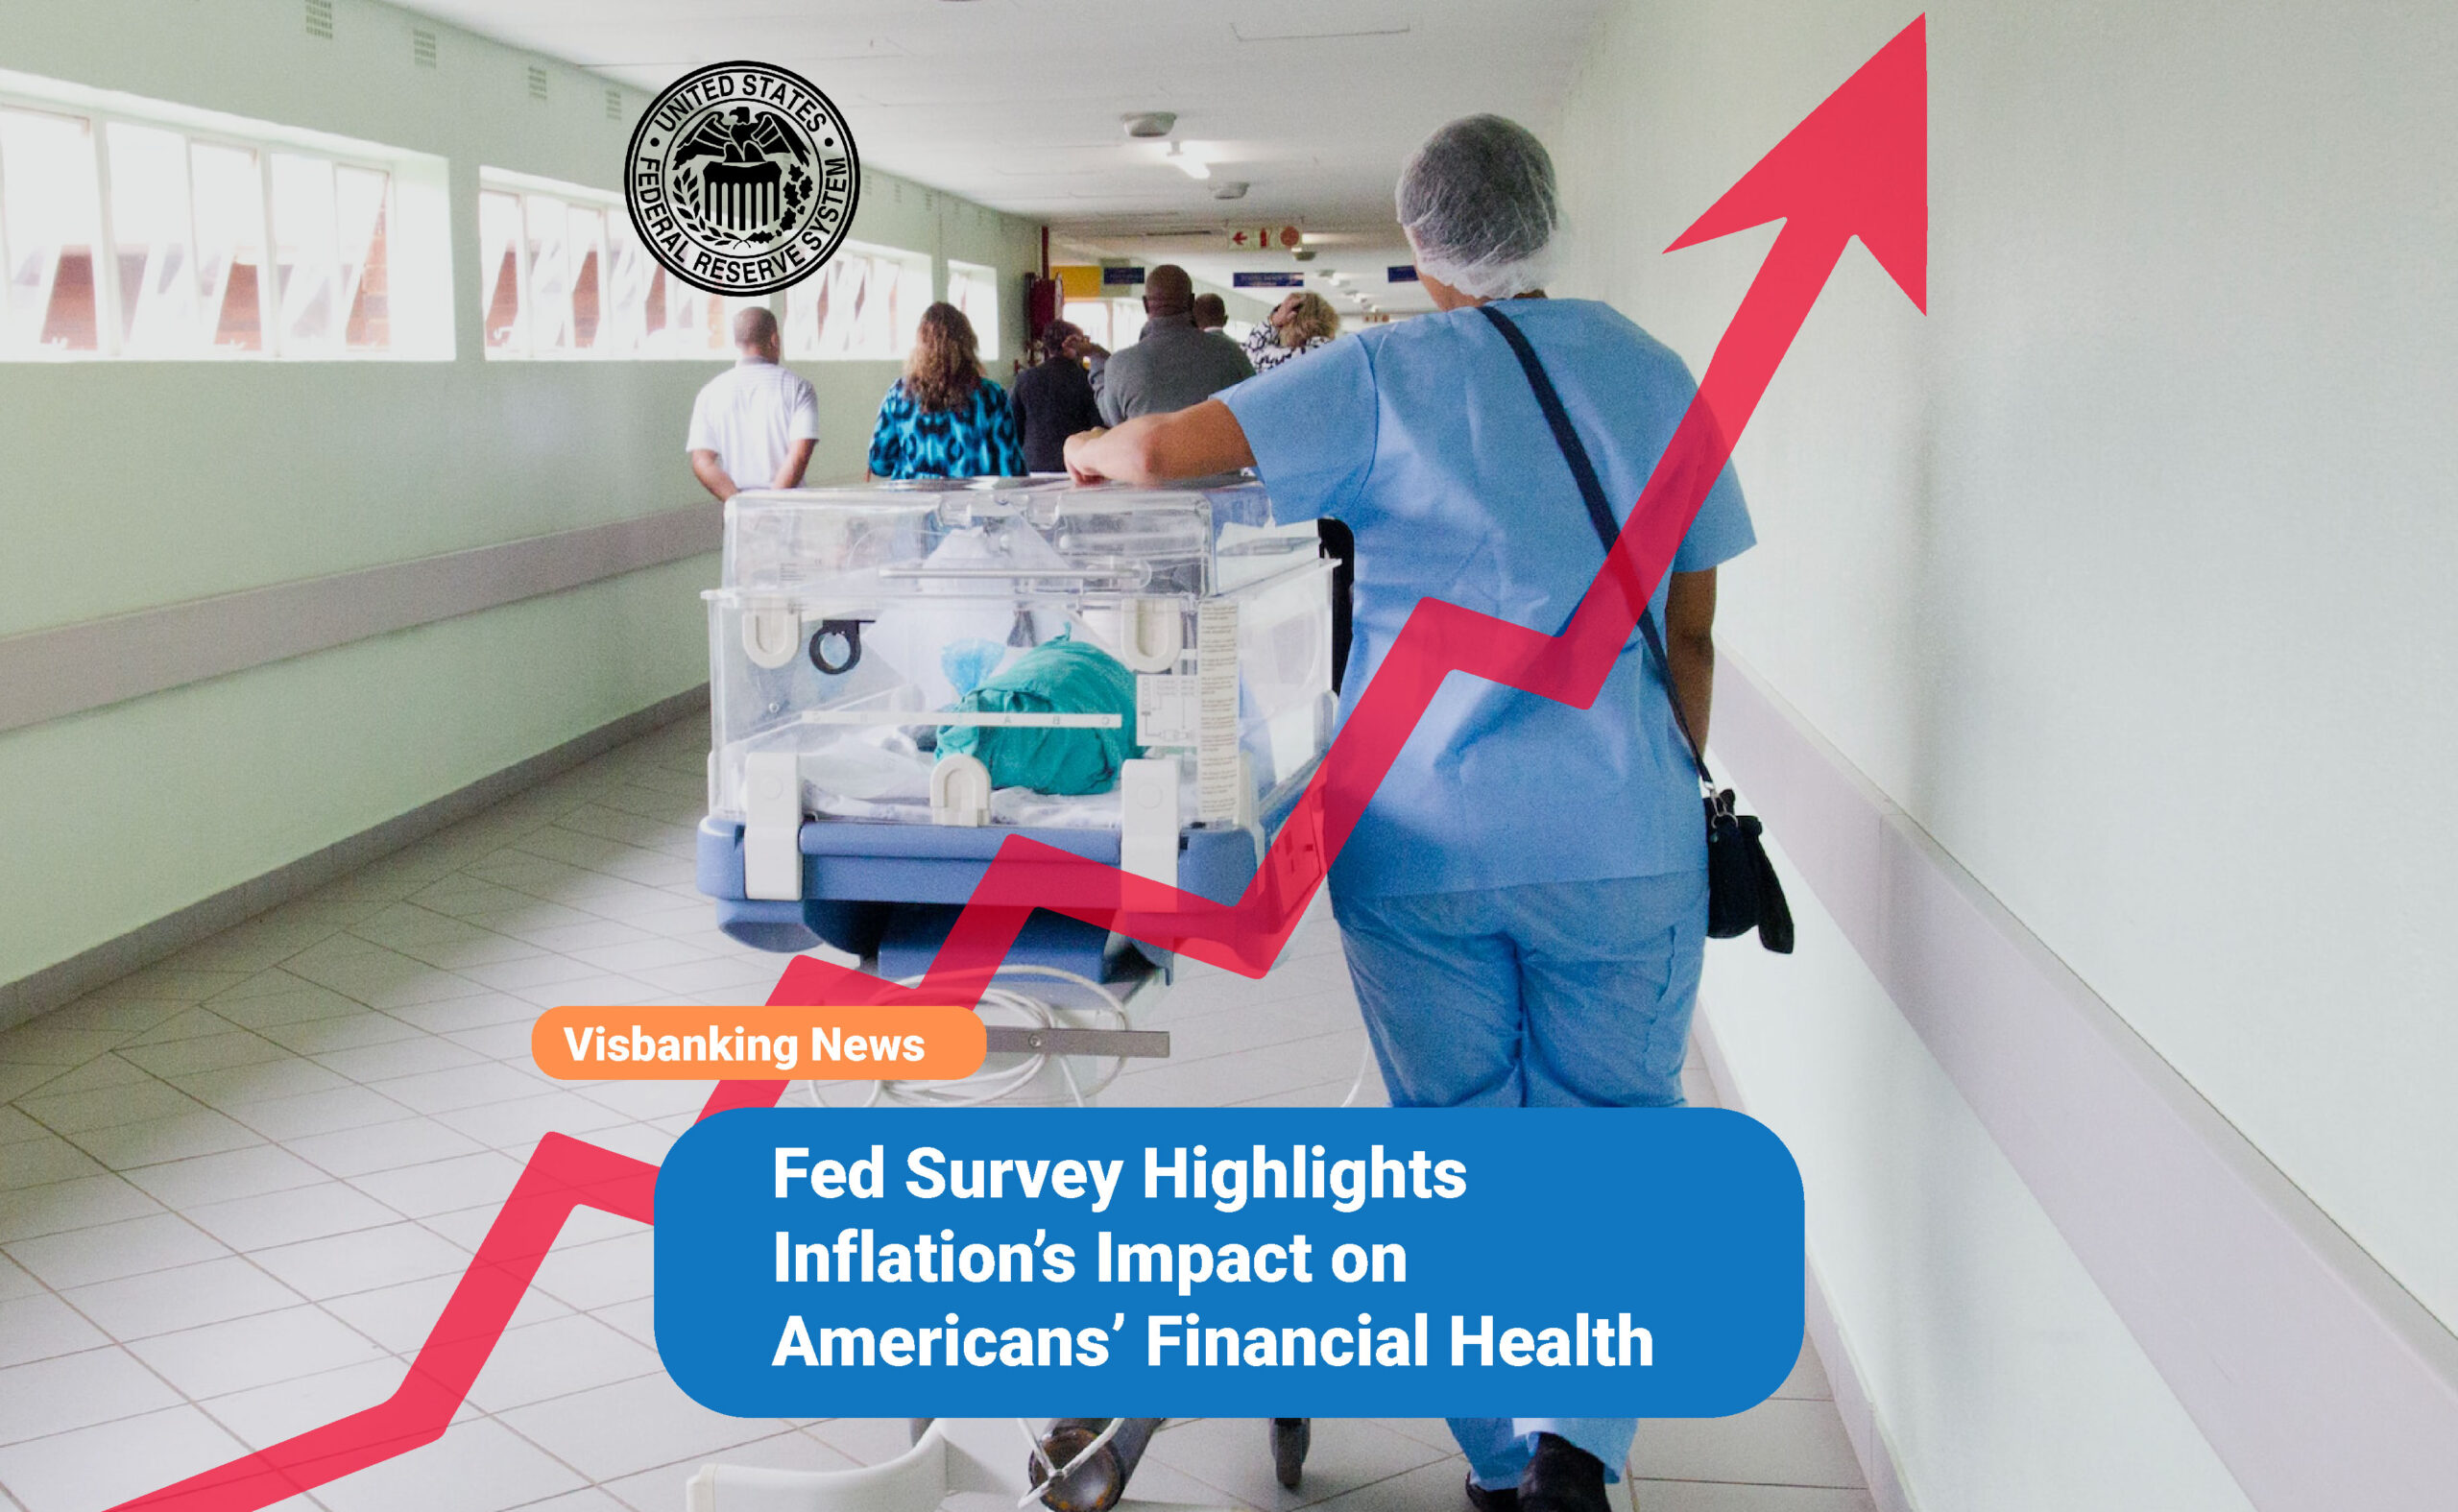 Fed Survey Highlights Inflation’s Impact on Americans’ Financial Health